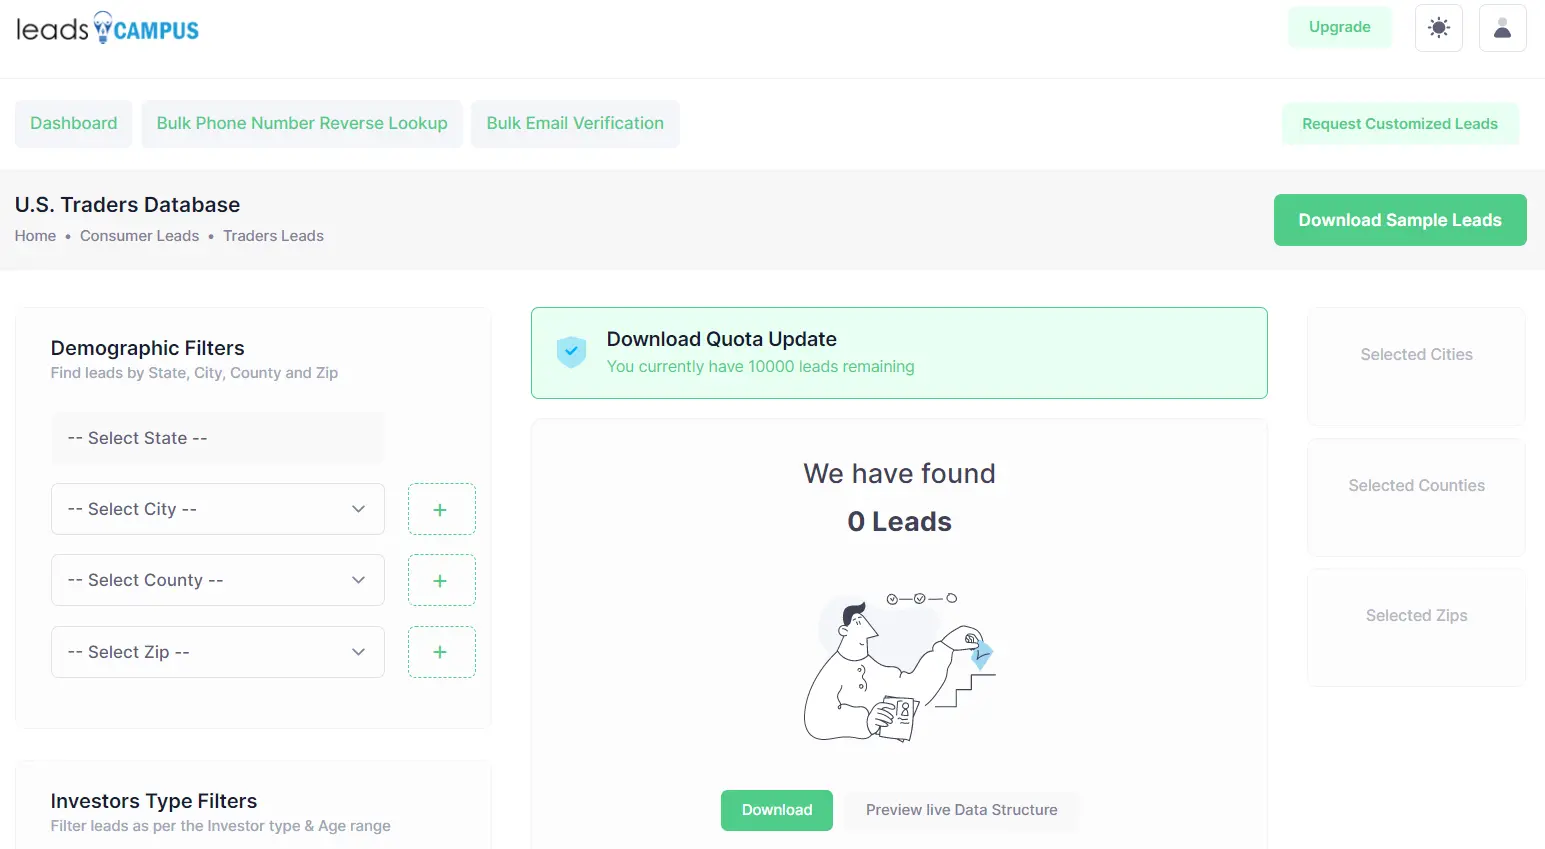 How to download stack trader leads from Leadscampus